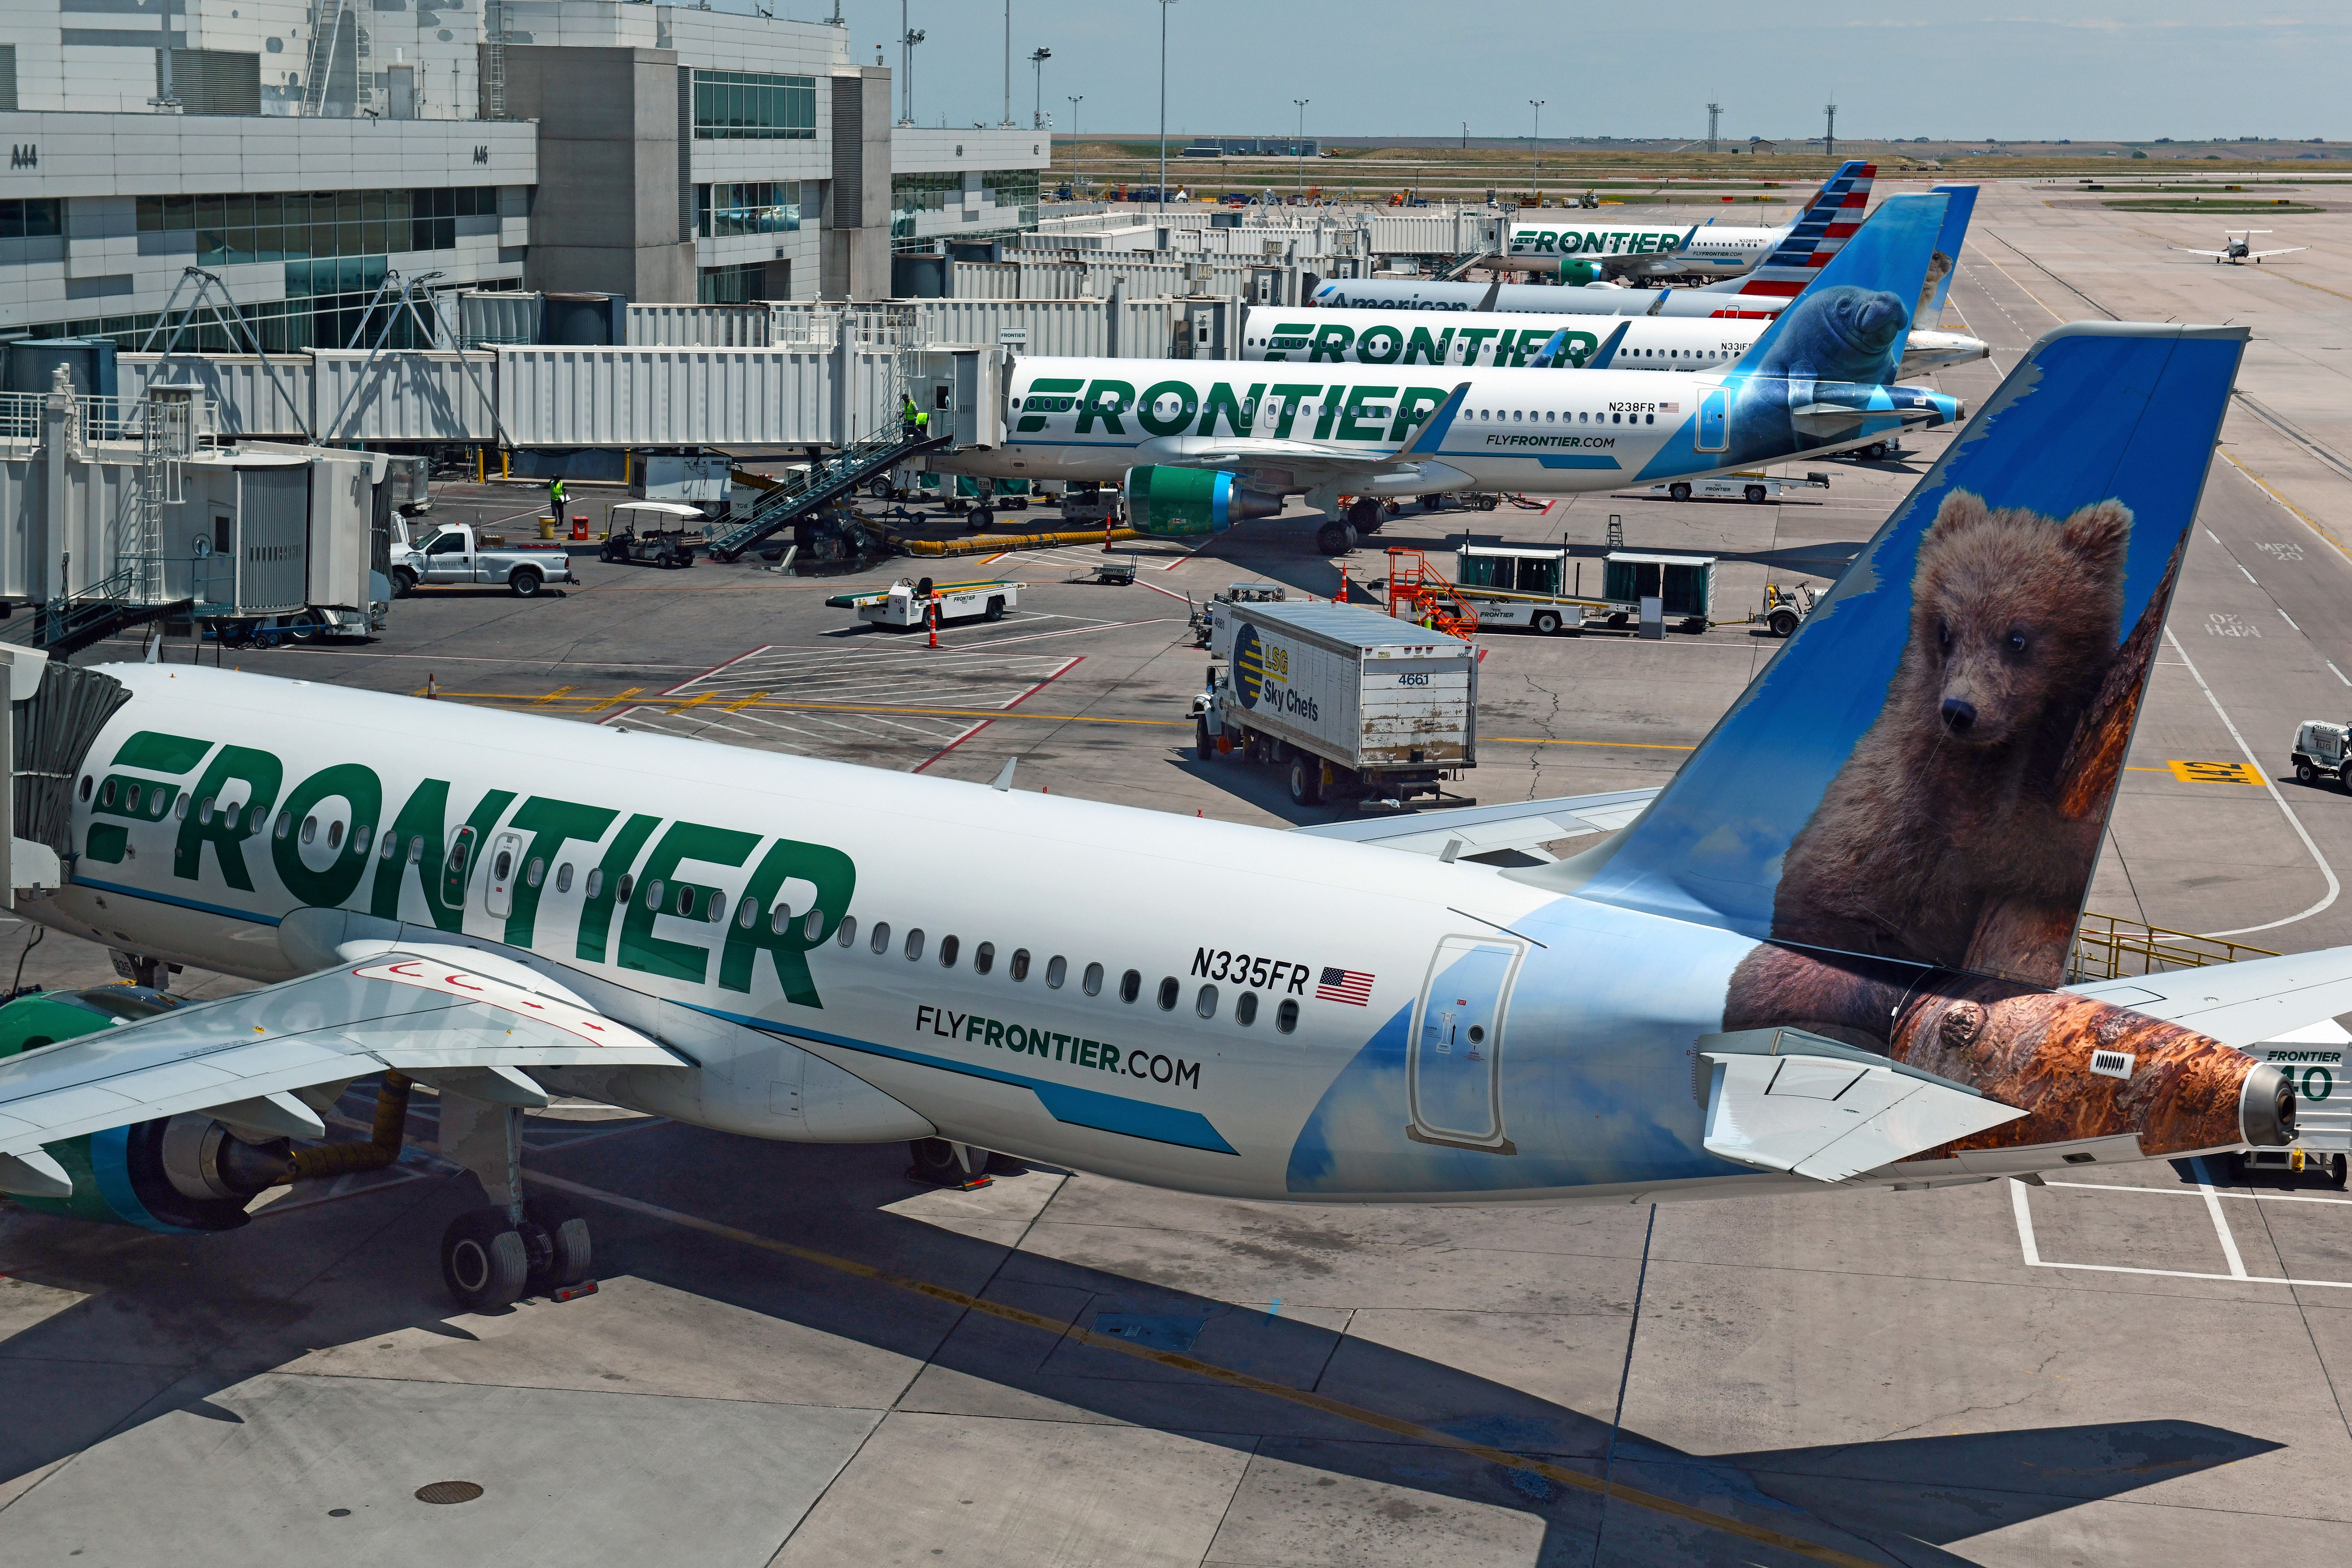 Several Frontier Airlines aircraft